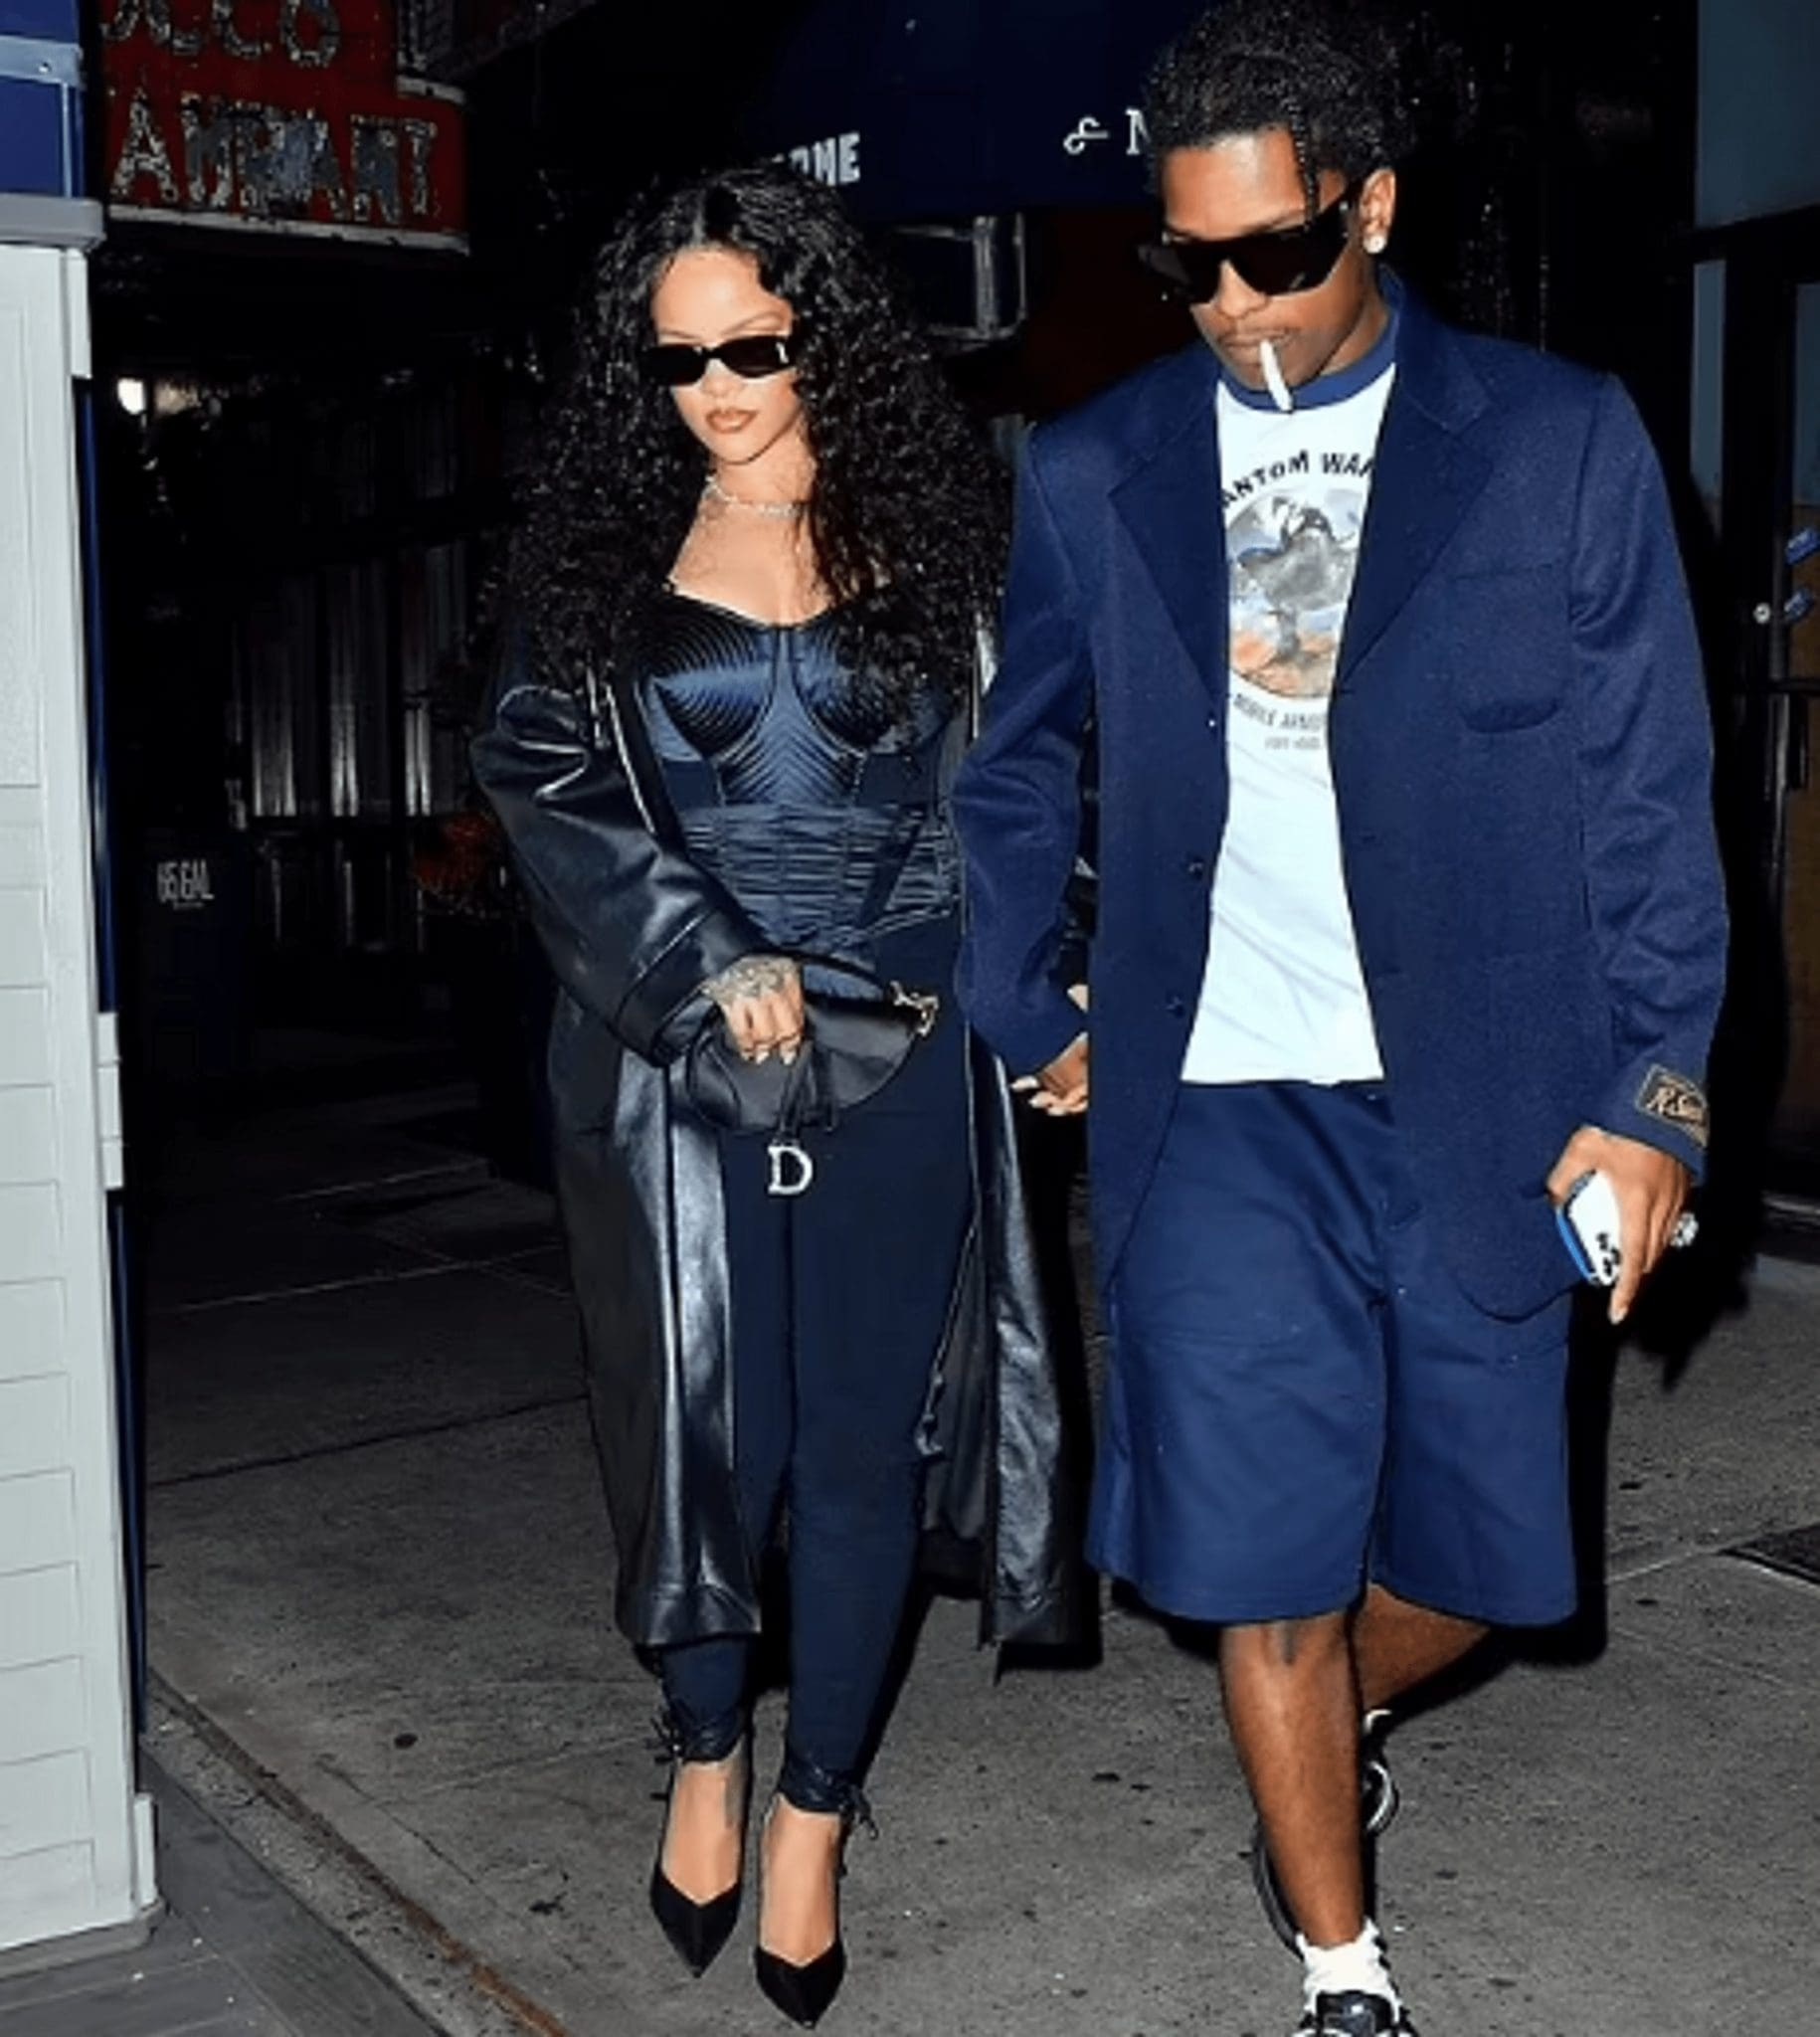 When Holding Hands With Her Boyfriend A$AP Rocky, Rihanna Looks Stunning With A Shiny Corset Top And Cones Bra